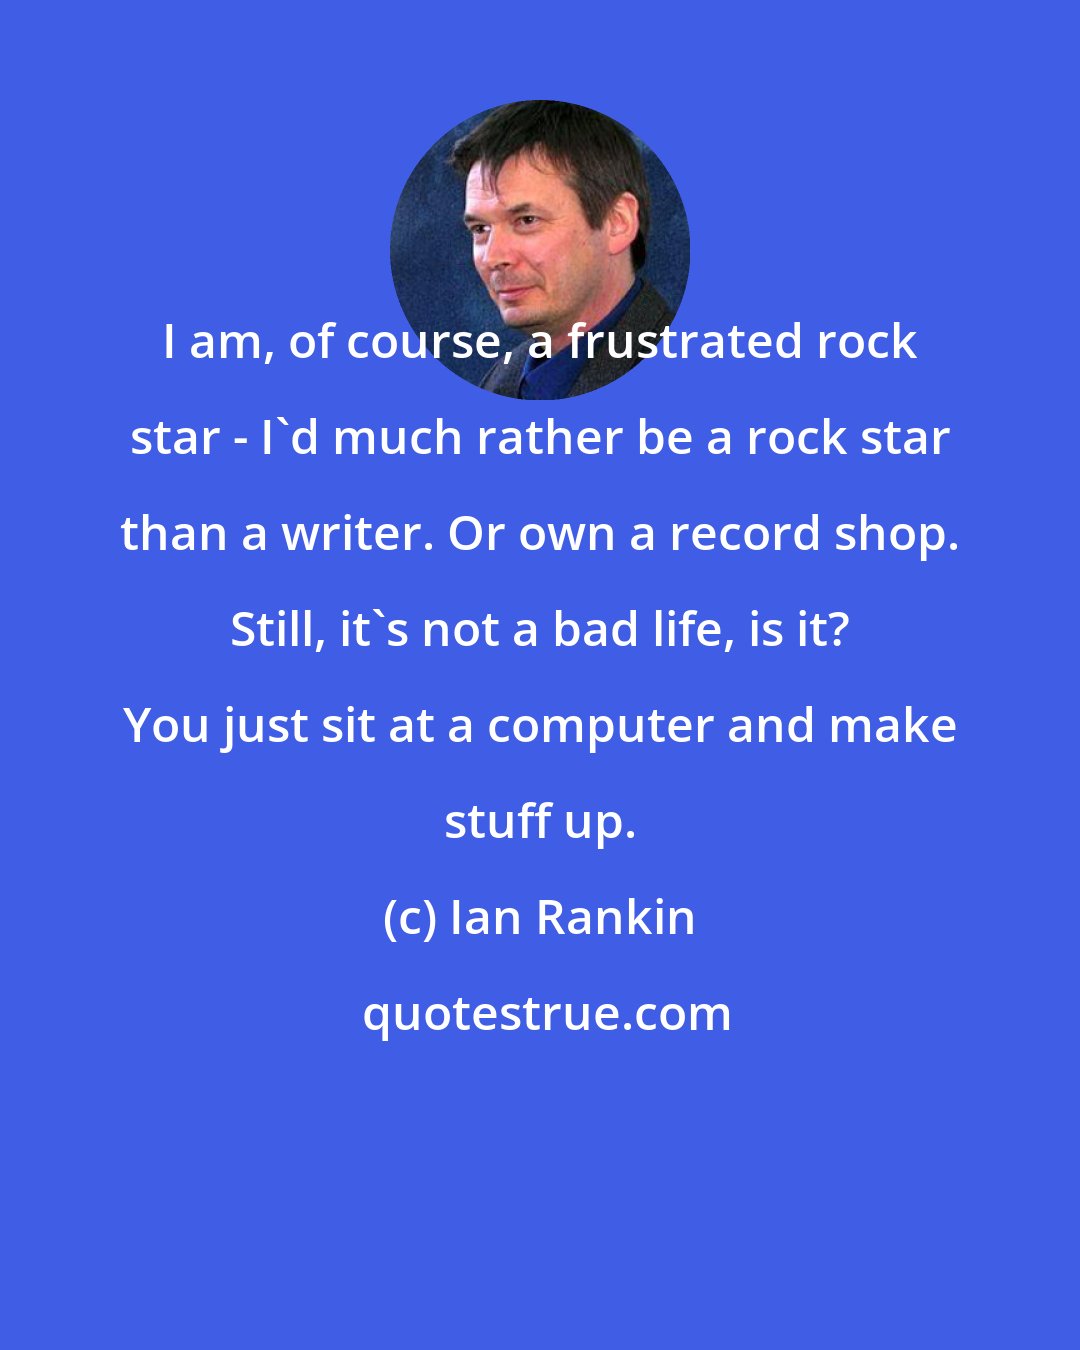 Ian Rankin: I am, of course, a frustrated rock star - I'd much rather be a rock star than a writer. Or own a record shop. Still, it's not a bad life, is it? You just sit at a computer and make stuff up.